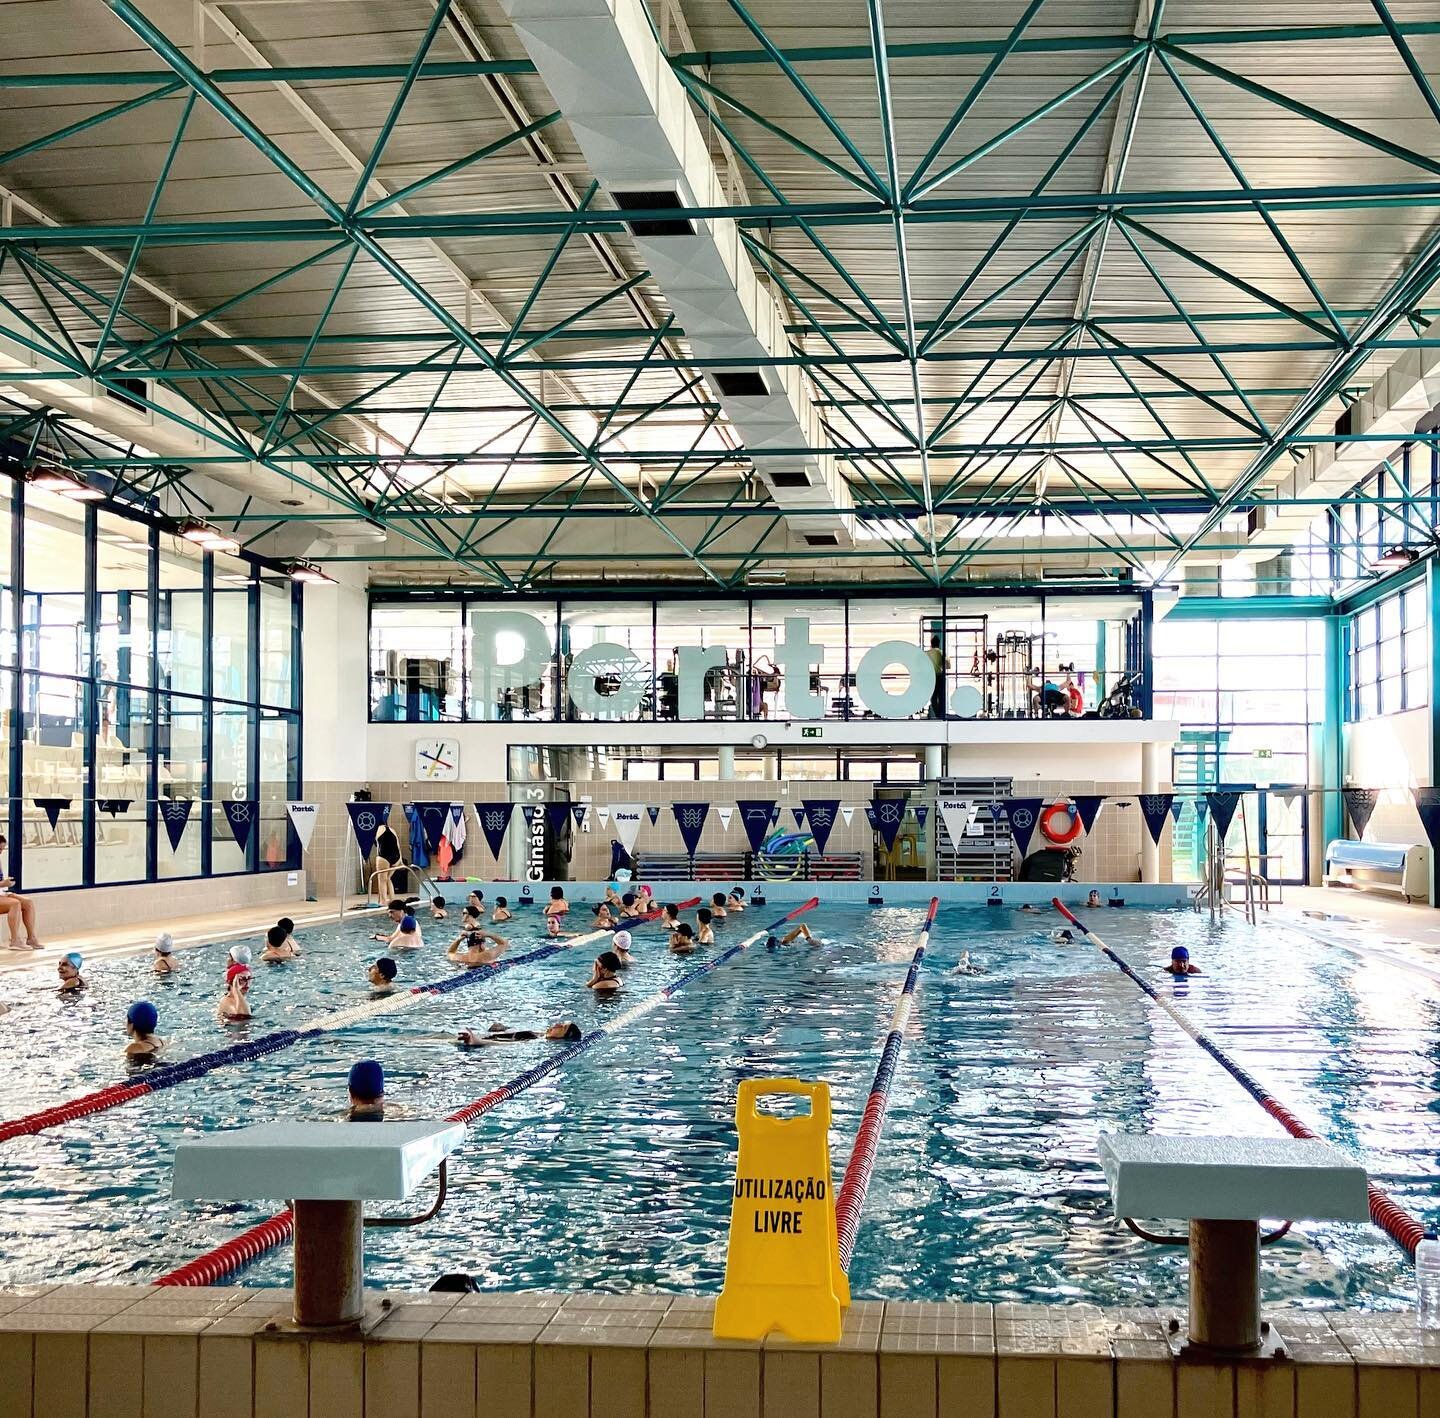 Swimming whilst pregnant has brought unexpected delight and camaraderie with the Portuguese water aerobics goers at our neighborhood pool. It&rsquo;s also prompted some reflection on endings. Often all the excitement and focus is on new beginnings bu